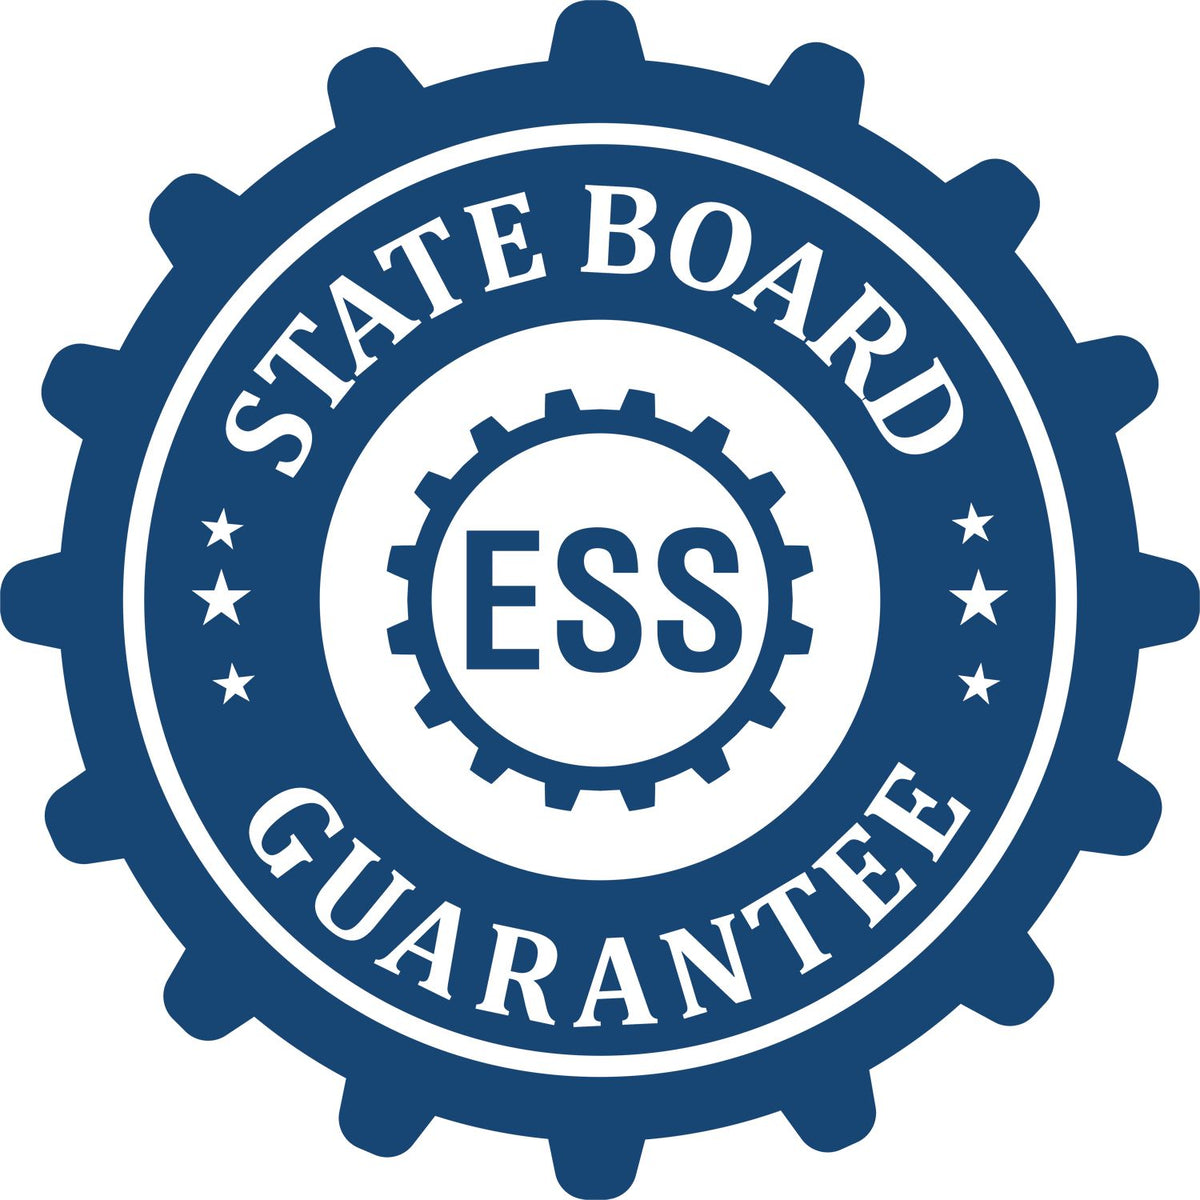 An emblem in a gear shape illustrating a state board guarantee for the Premium MaxLight Pre-Inked California Engineering Stamp product.